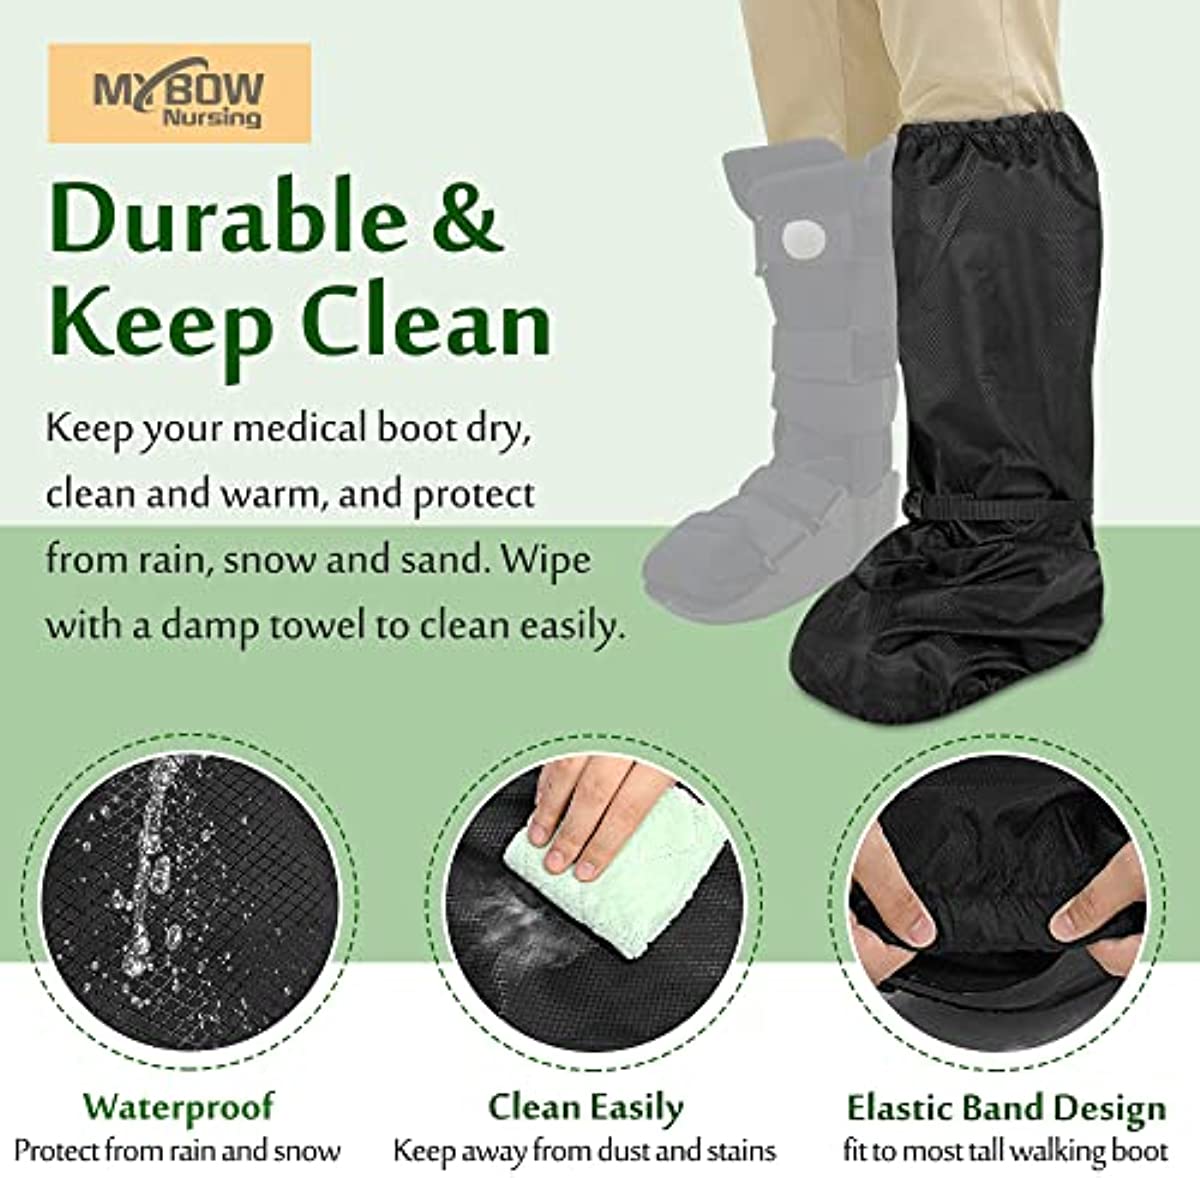 Walking Boot Cover Tall Orthopedic Medical Boot Cover Waterproof Fracture Foot Cast Cover for Men Women Outdoor Winter Snow Rain Protector Recovery Boot Cover (Black)